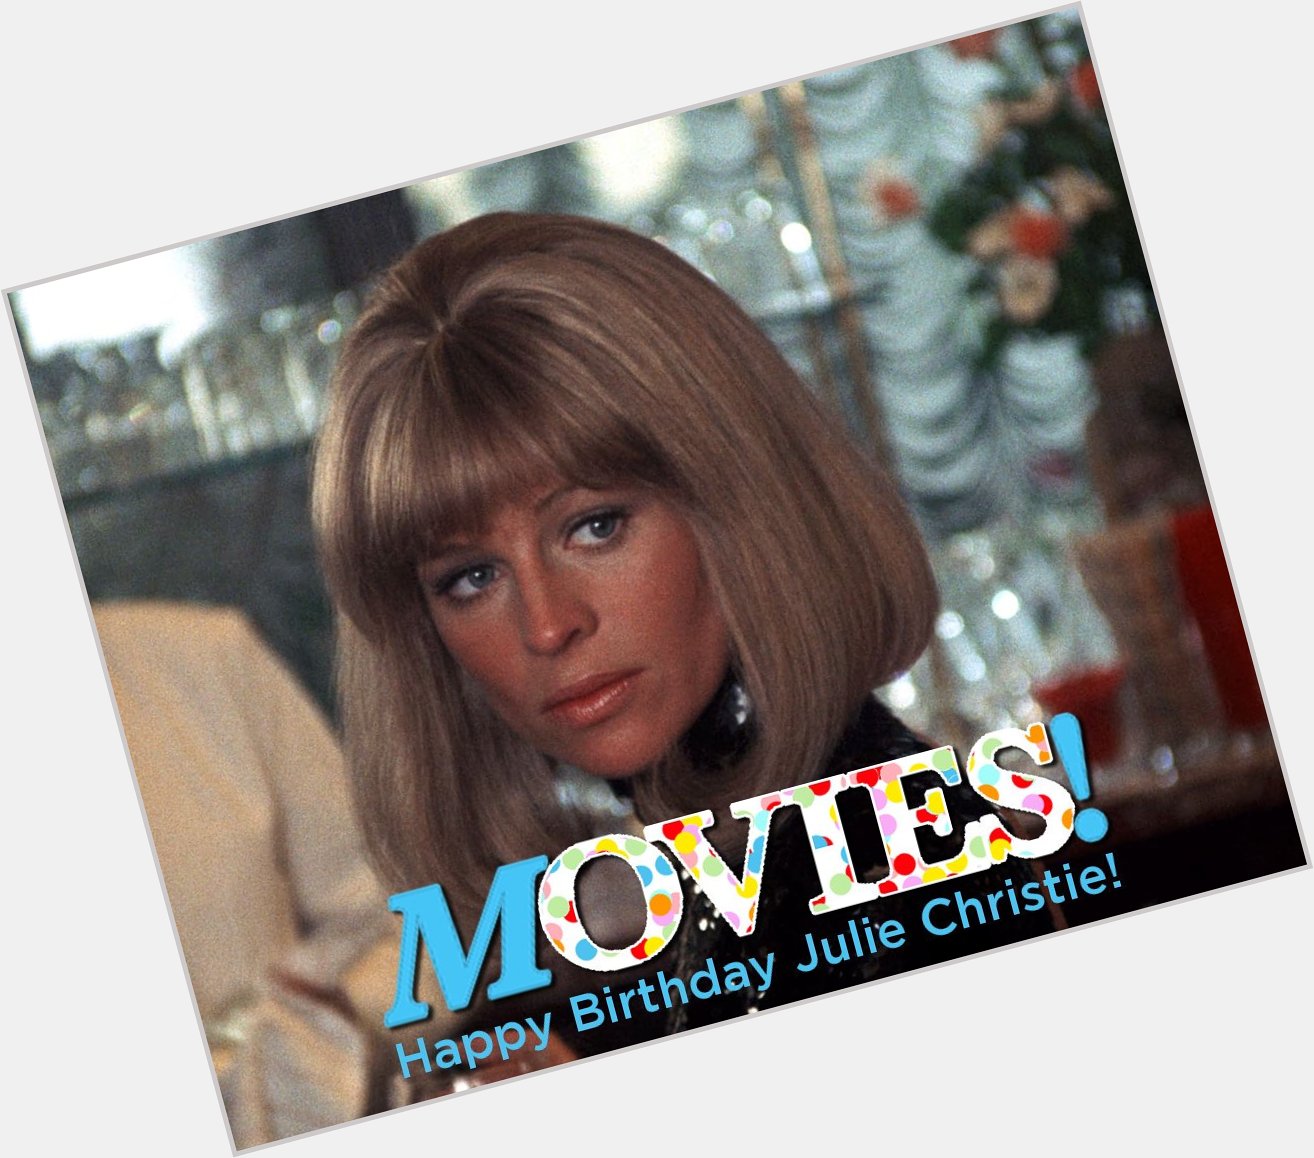 Happy Birthday to Julie Christie!

Know what film this is from?  